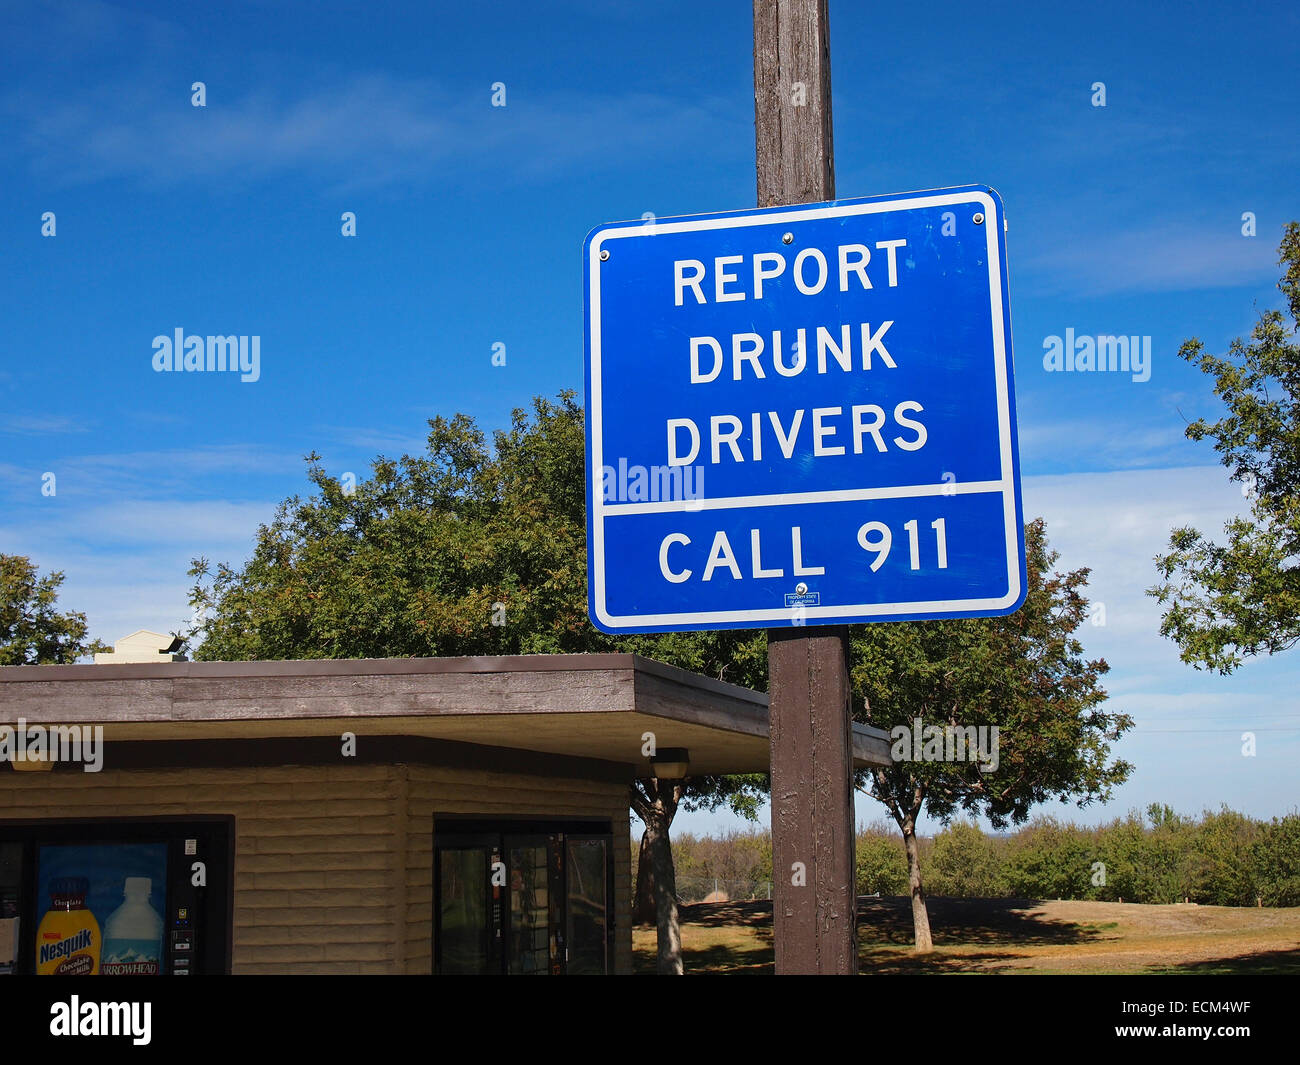 Report drunk drivers call 911 sign at rest stop along Interstate 5 in California Stock Photo